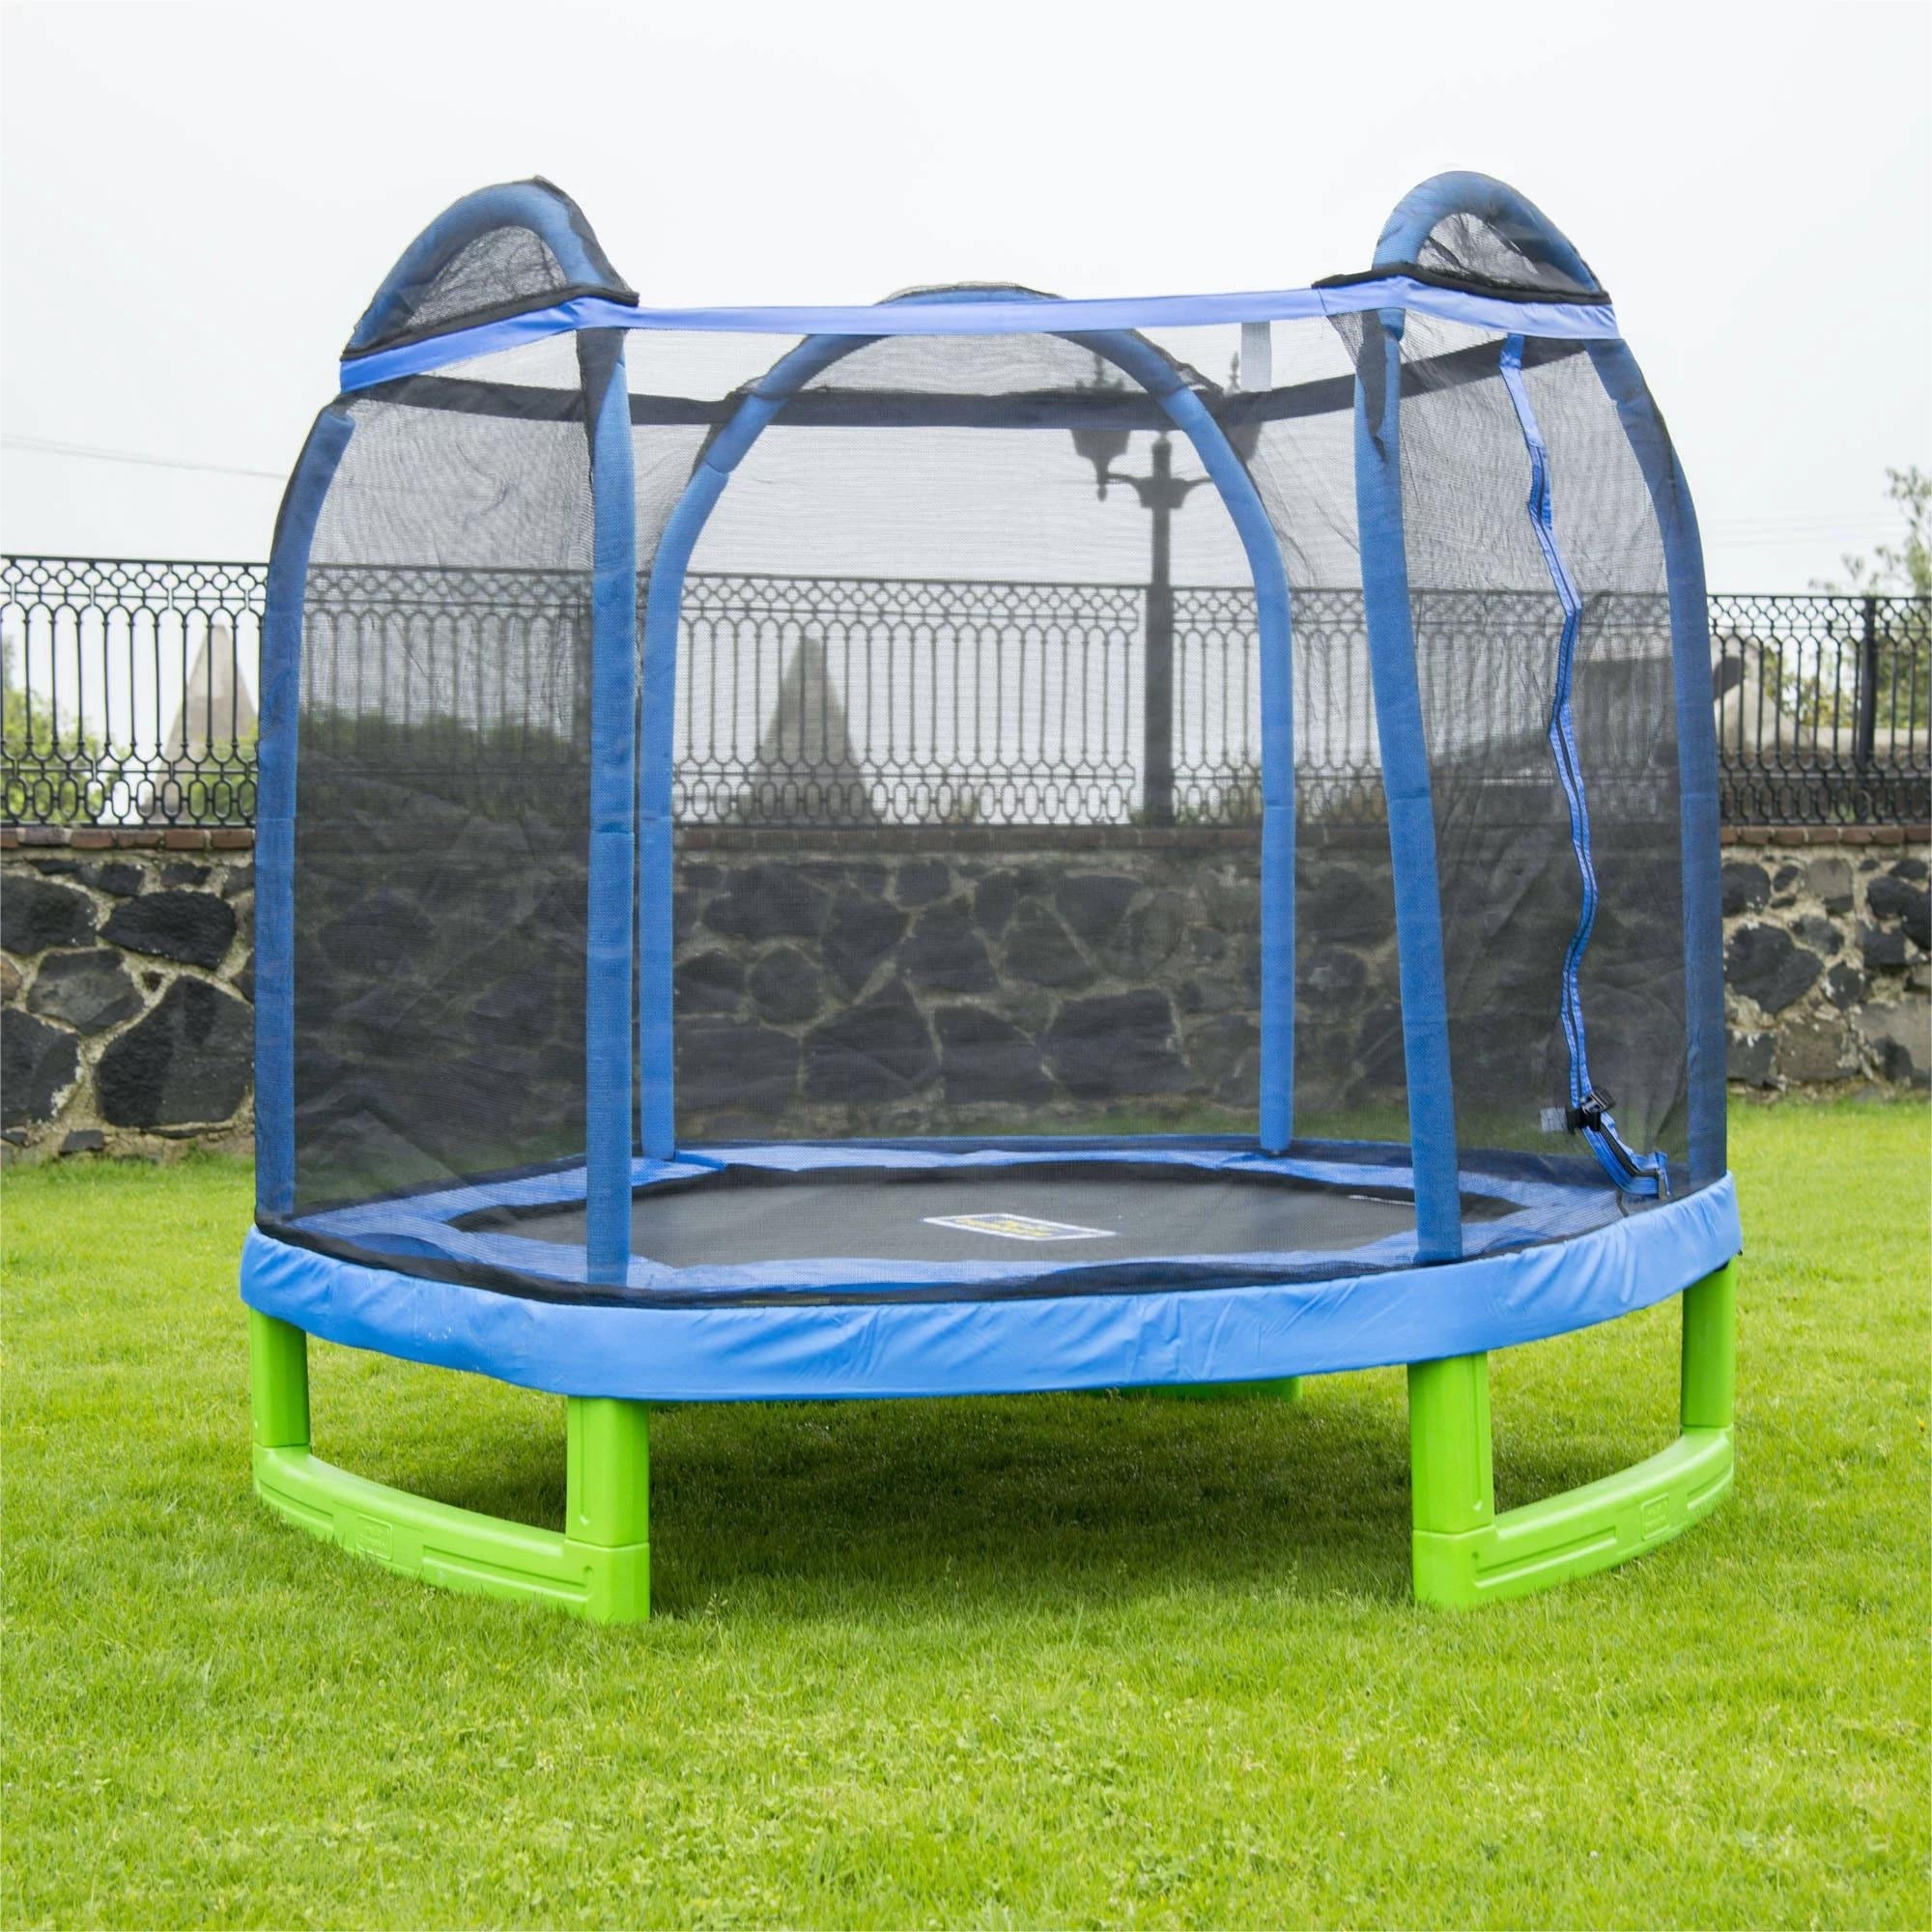 Underinddel rådgive Demonstrere 7-Foot My First Trampoline Hexagon (Ages 3-10) for Kids - Bed Bath & Beyond  - 38272629